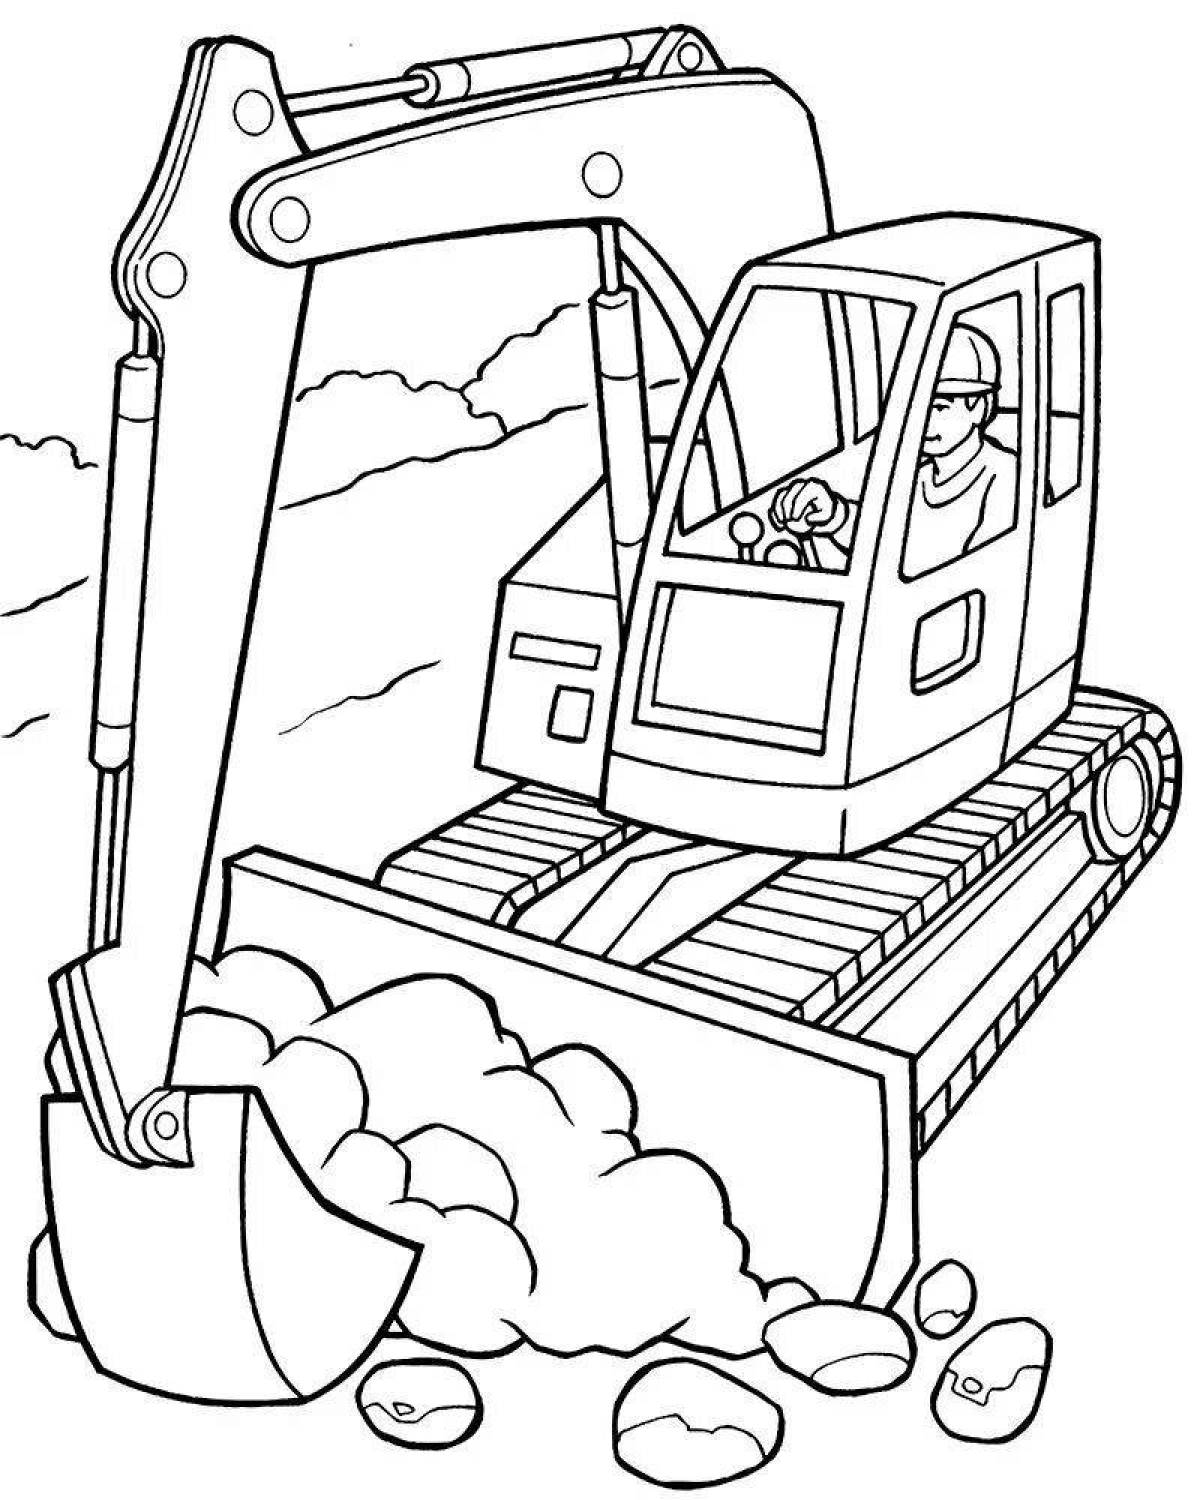 Luxury construction machinery coloring book for boys